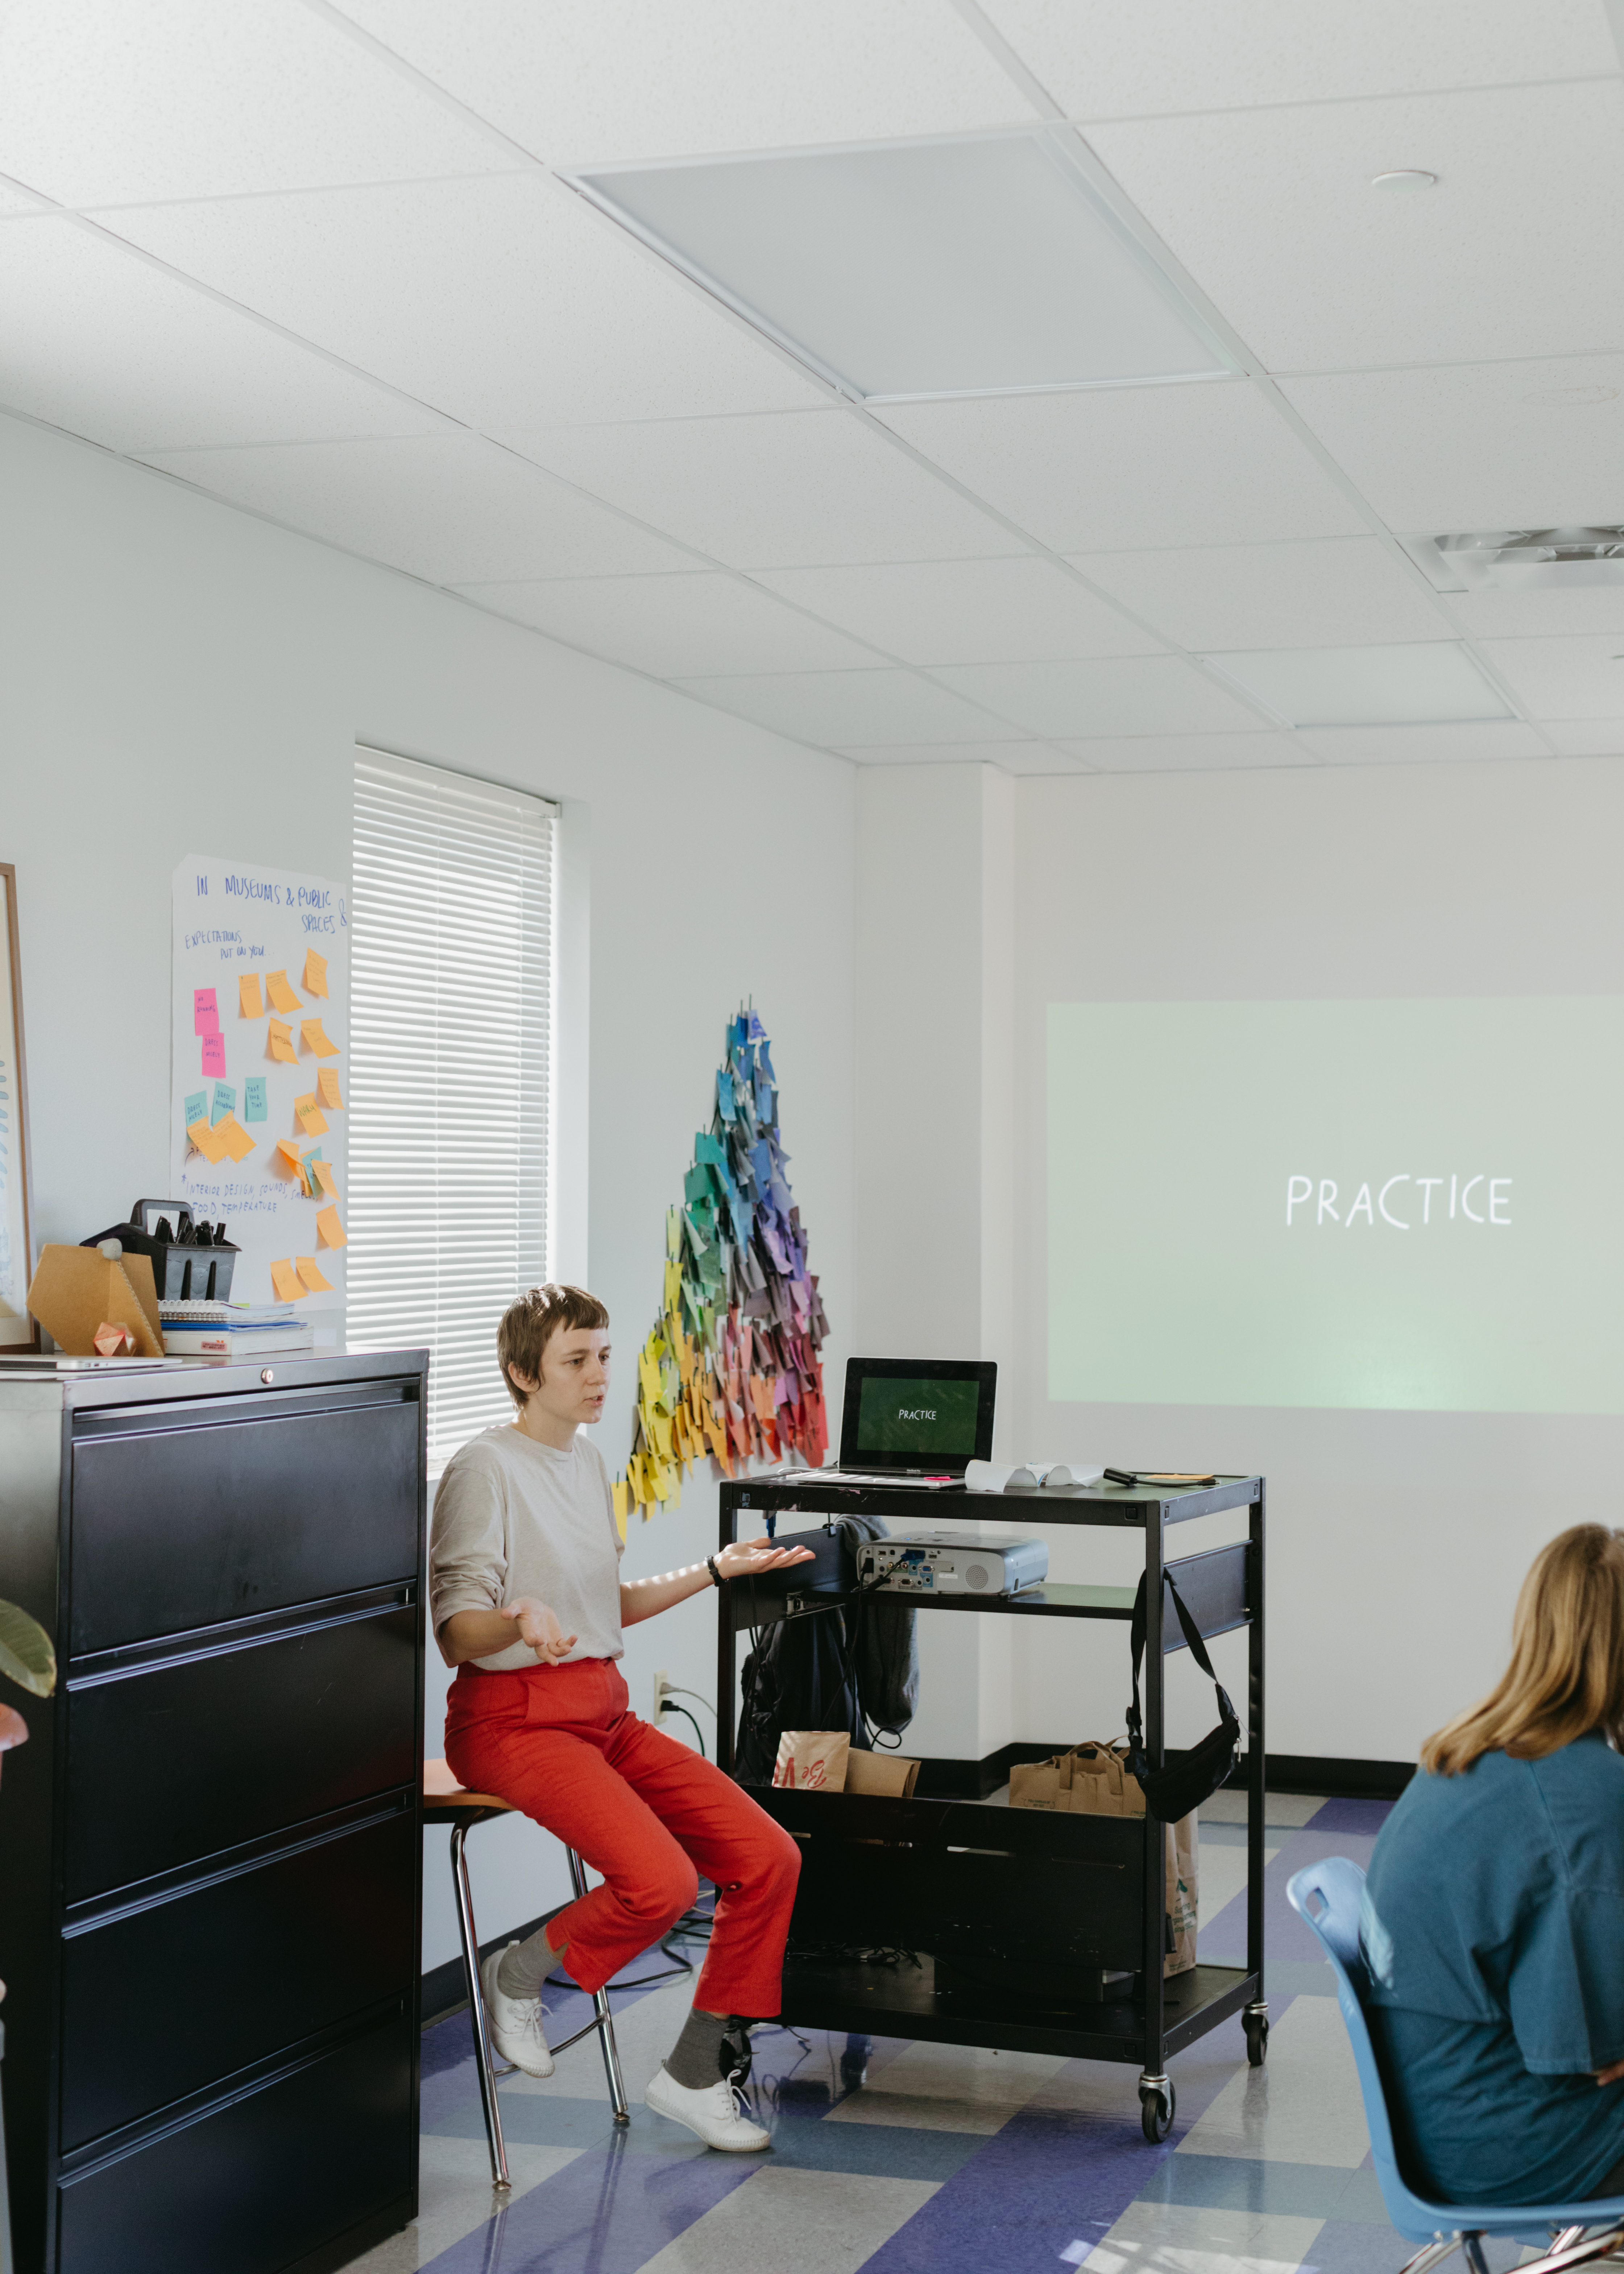 A photo of Shannon at Girls Athletic and Leadership School (GALS), giving a presentation, with the word "Practice" being projected onto the wall. She is sitting in a chair next to the presentation, talking with her palms facing upwards, wearing a beige top and bright orangish, pinkish pants.